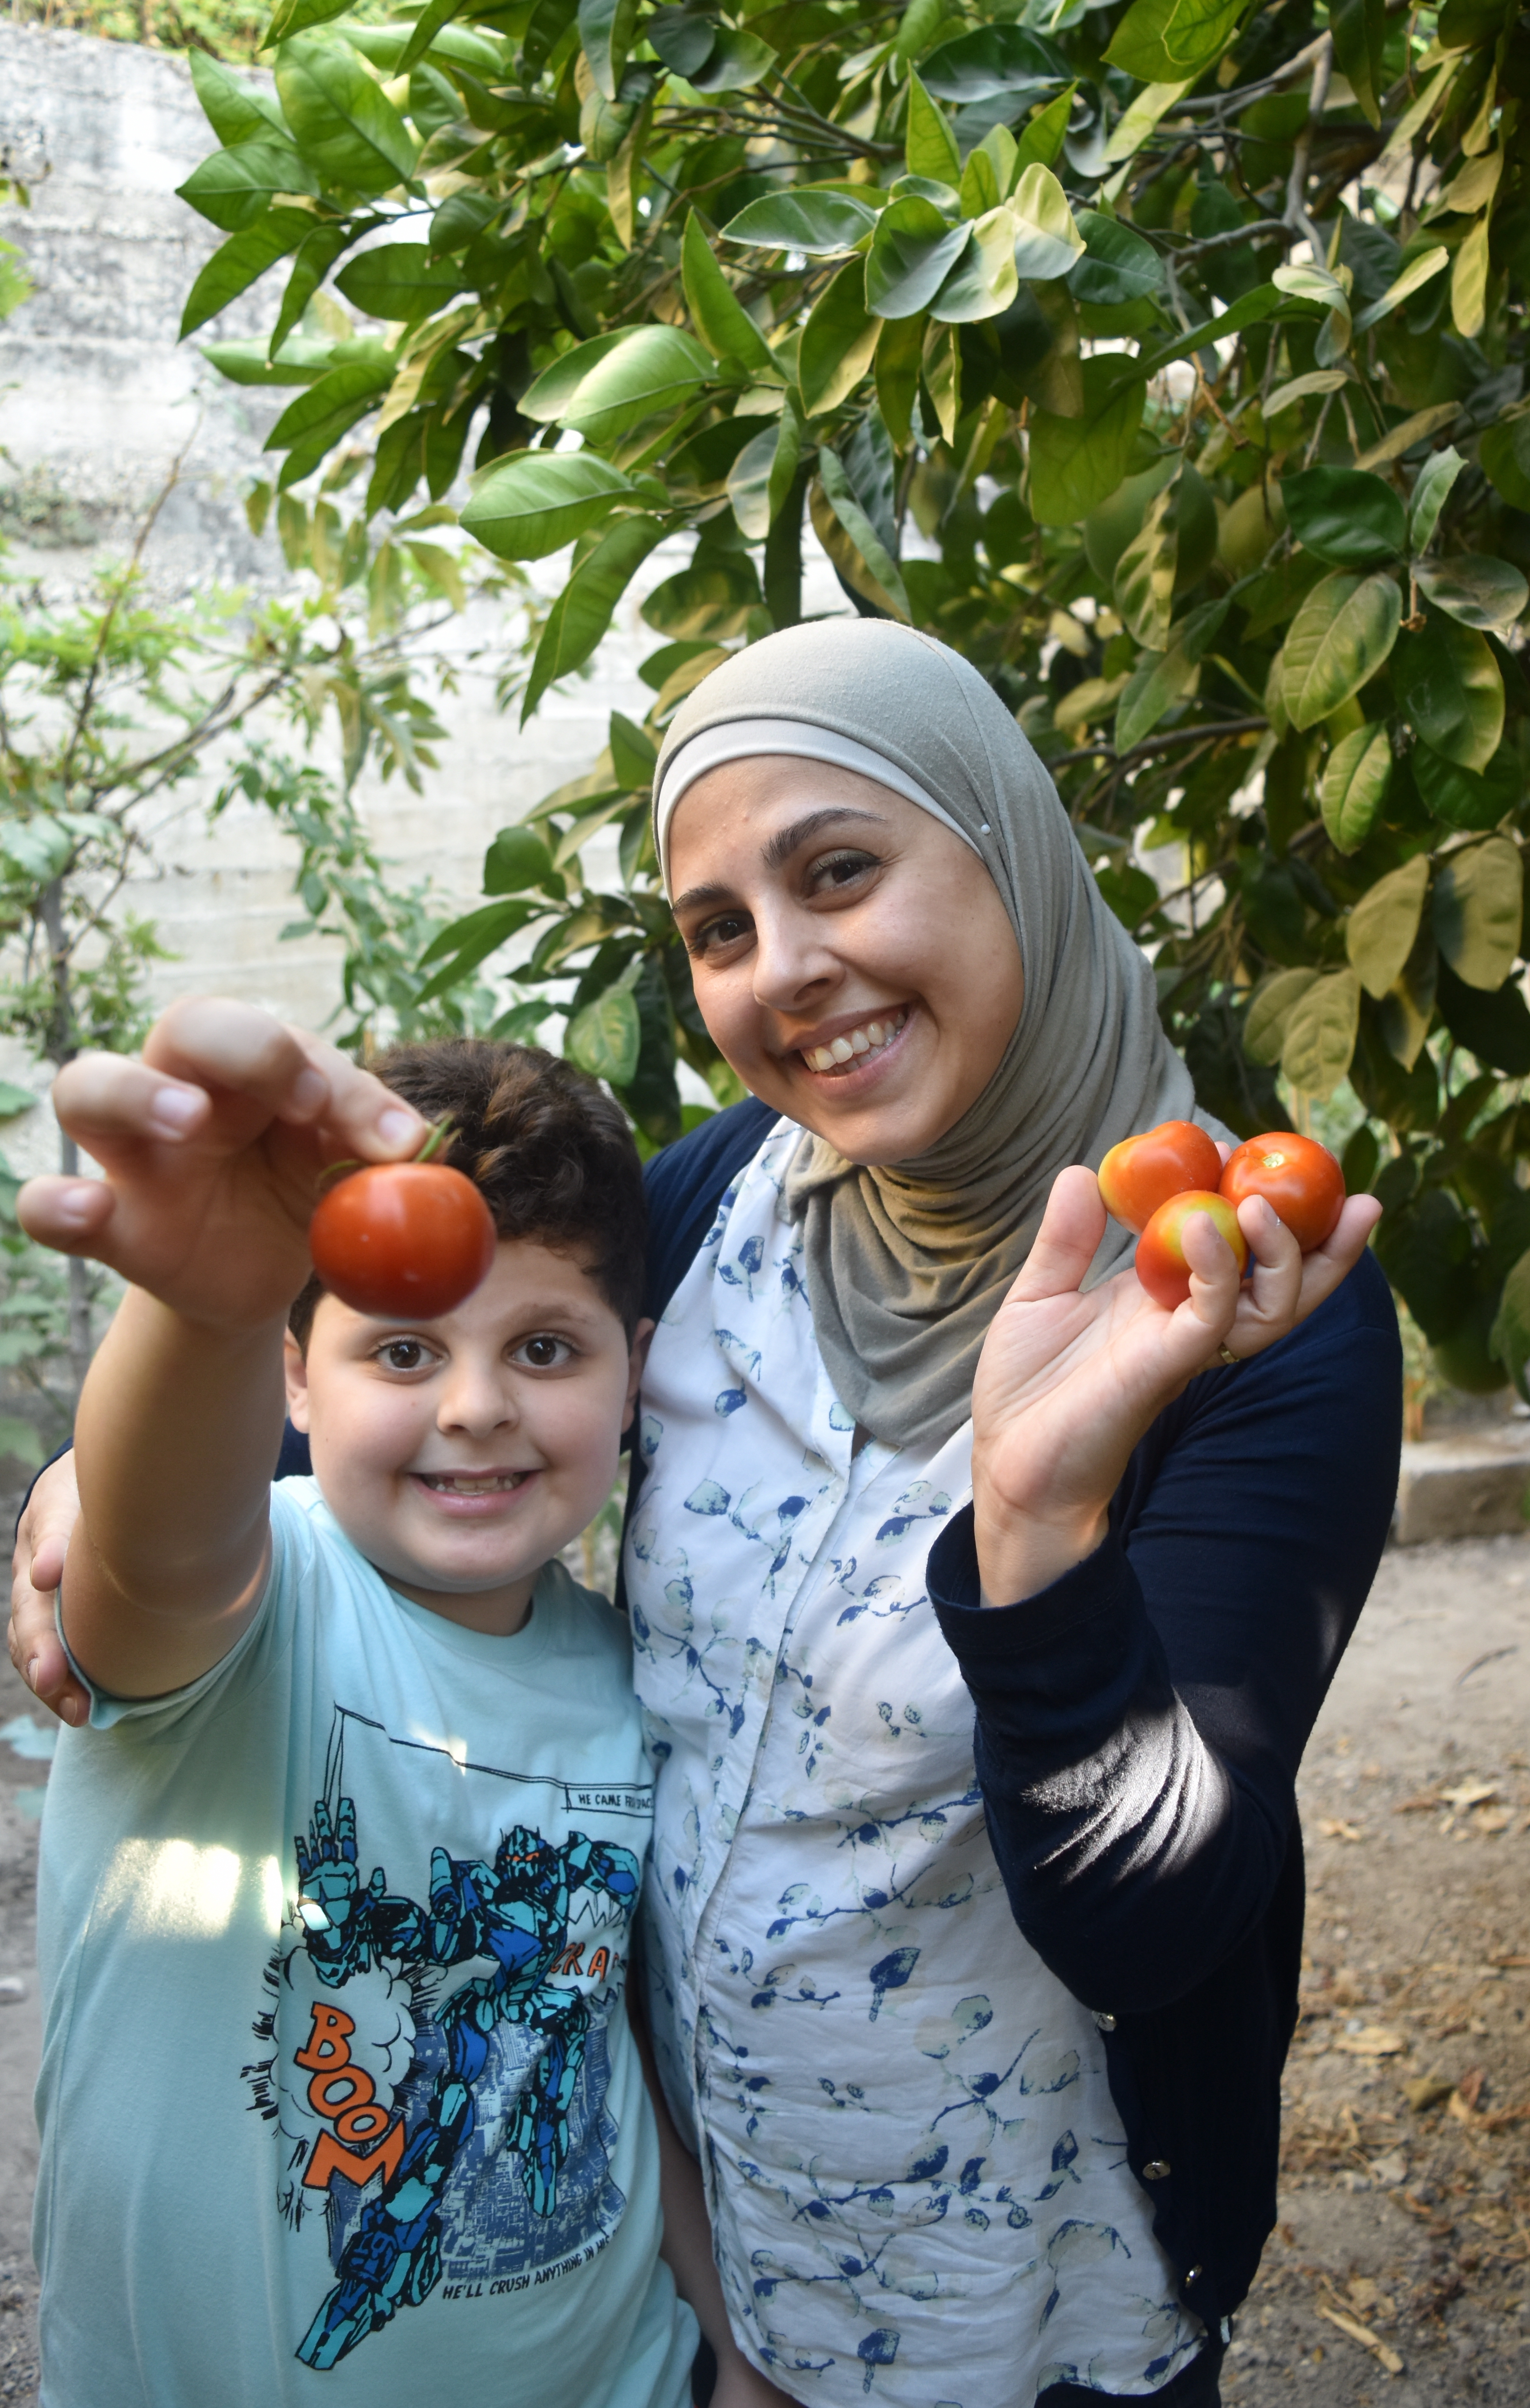 Photo of a woman and a young boy holding up tomatoes and smiling. 